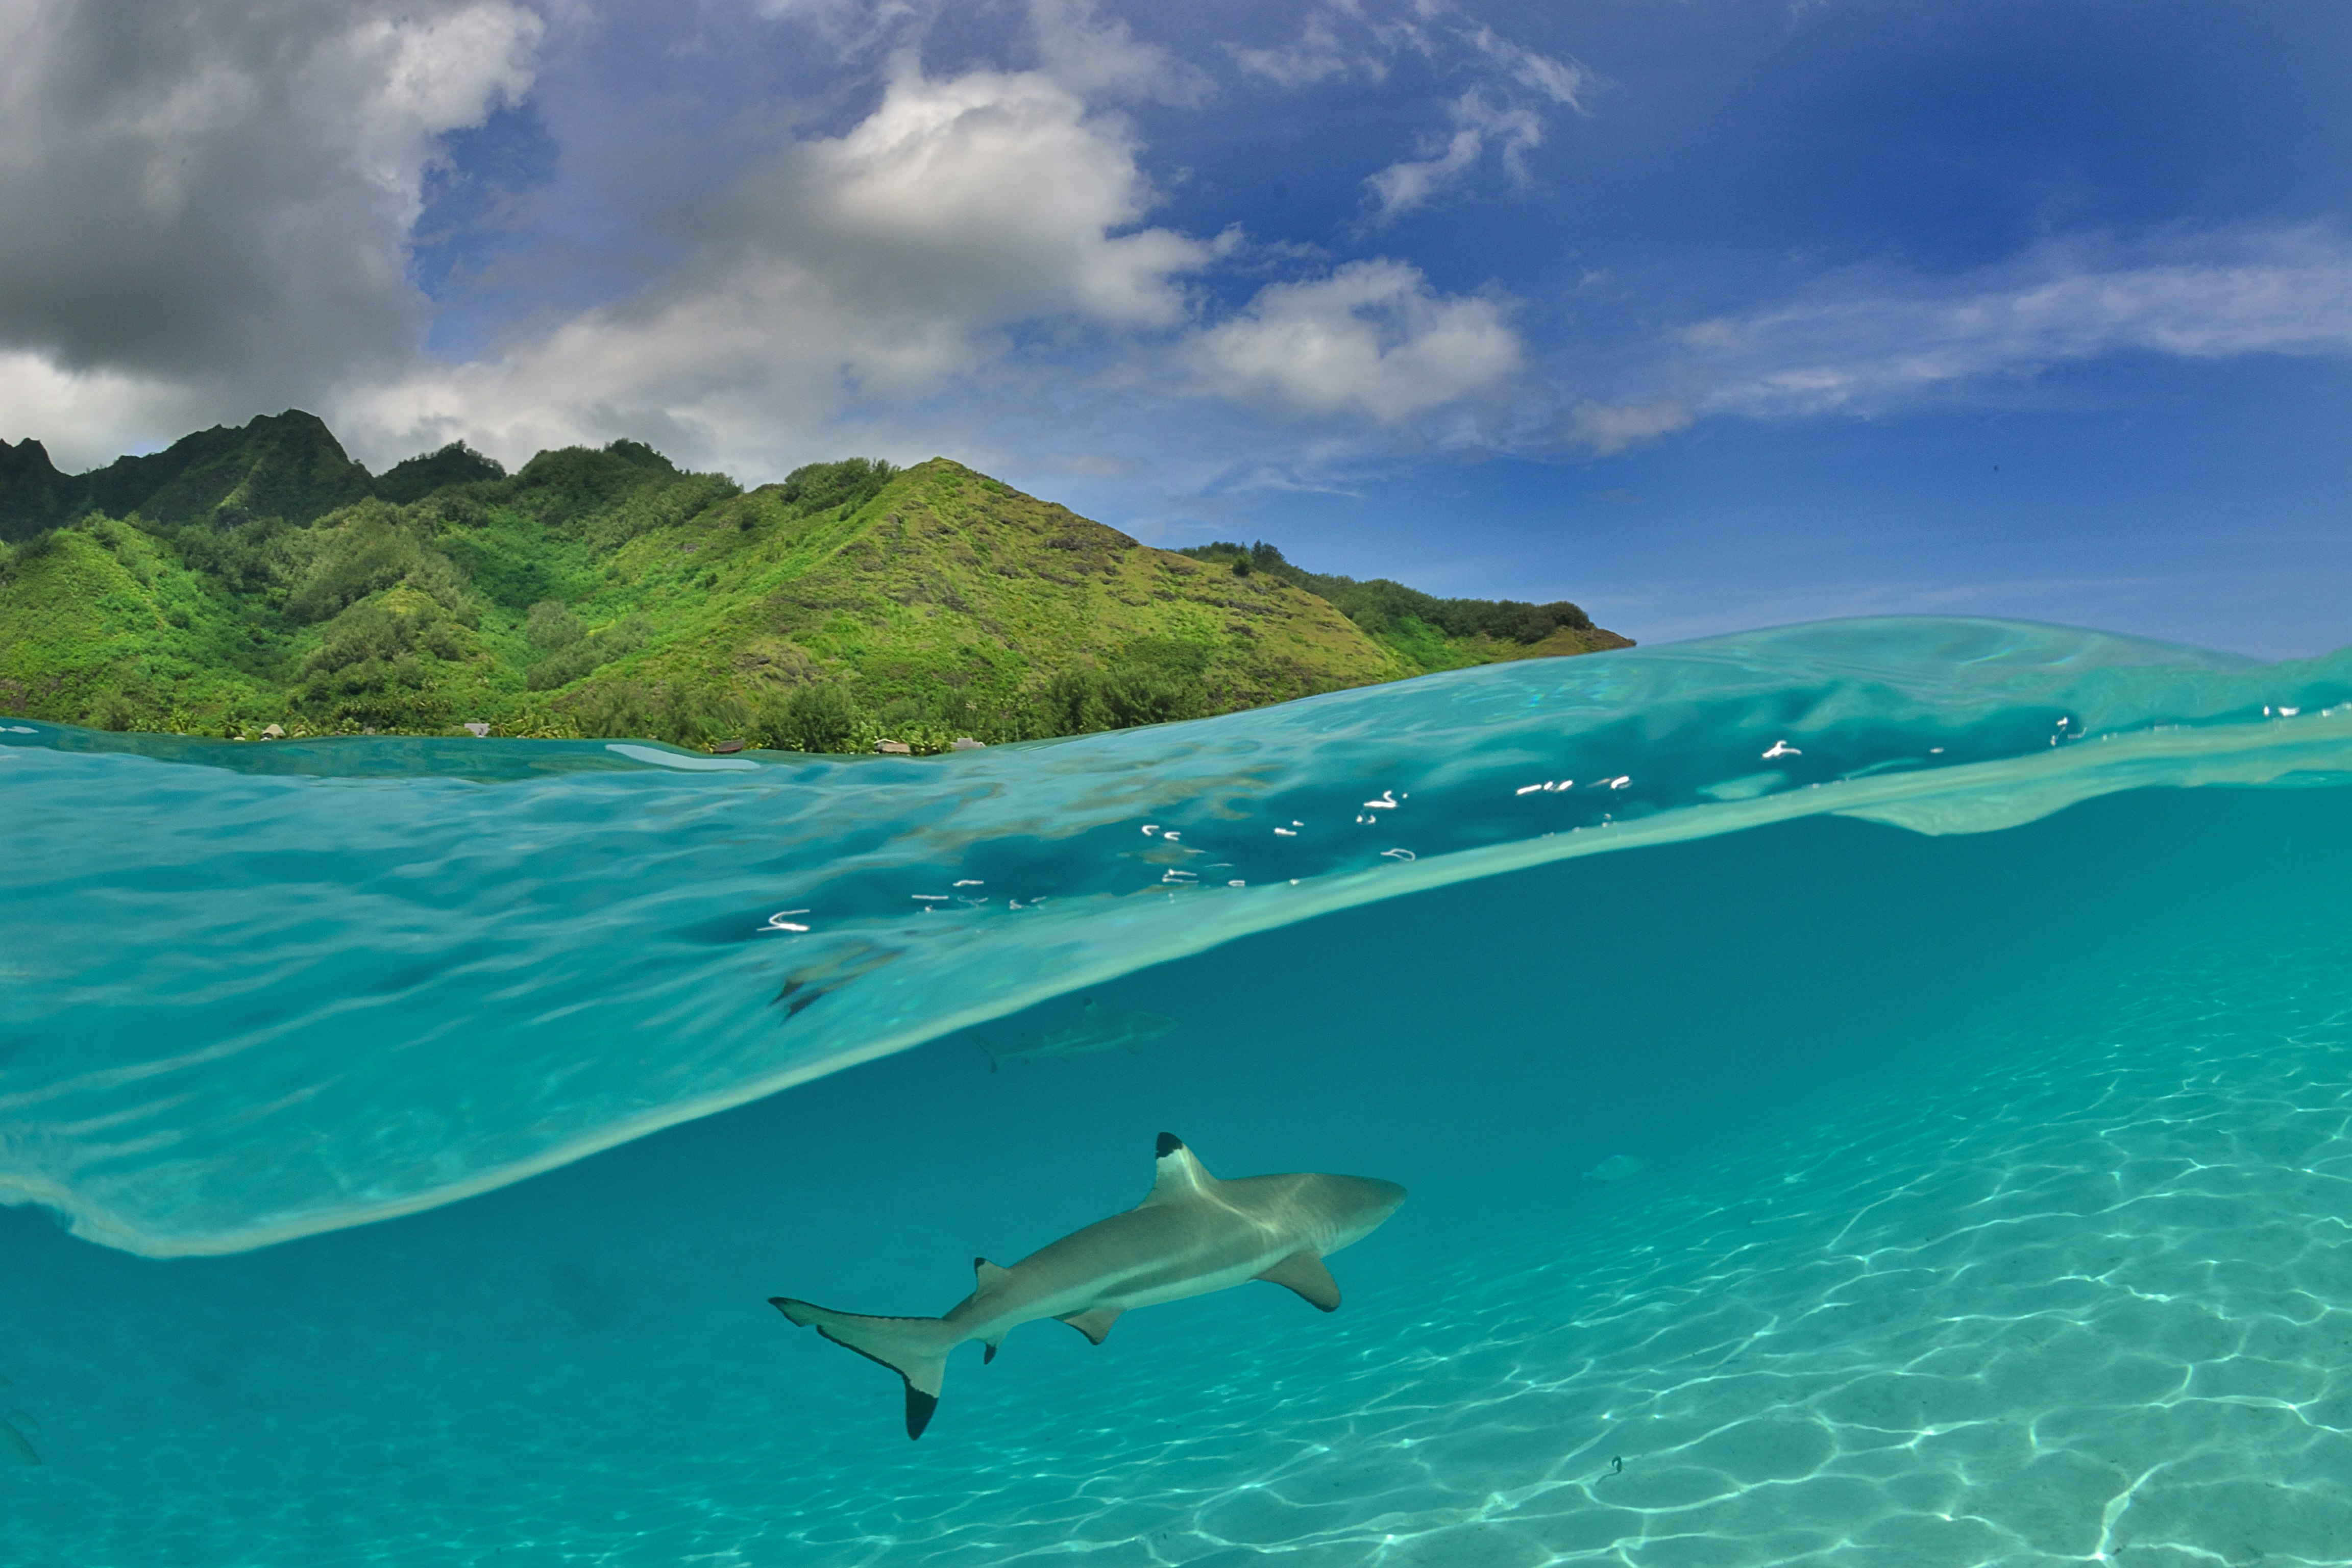 A photo taken half in and half out of the water; a blacktip shark is swimming in clear blue waters while a lush, mountainous island is visible above.